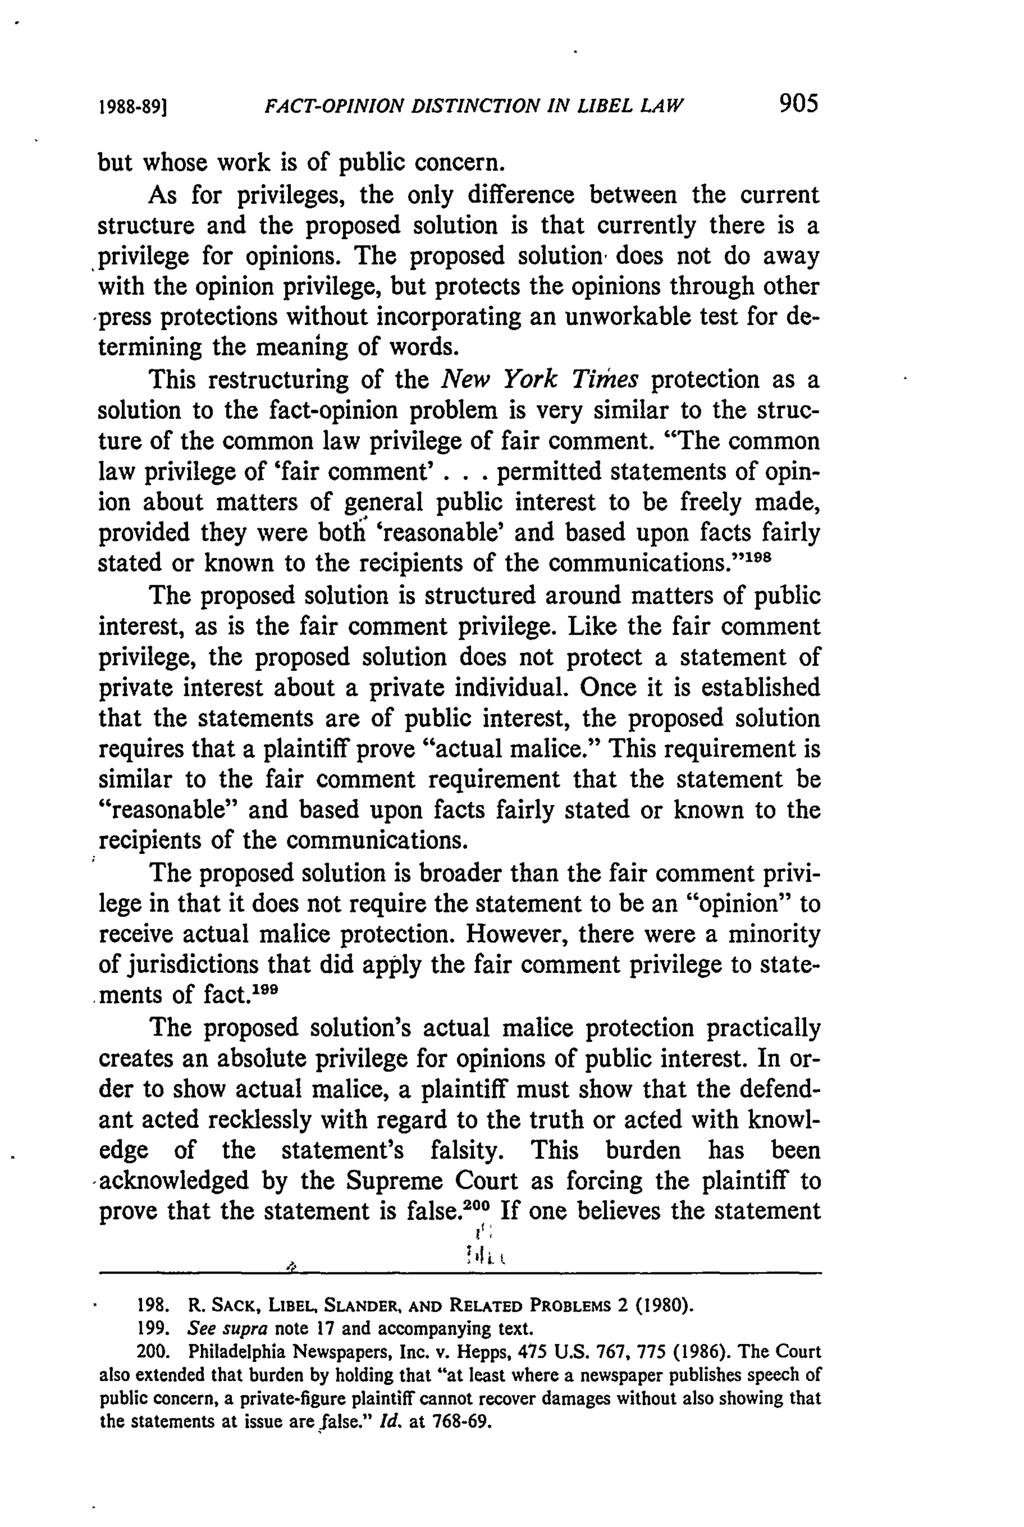 1988-891 FACT-OPINION DISTINCTION IN LIBEL LAW but whose work is of public concern.